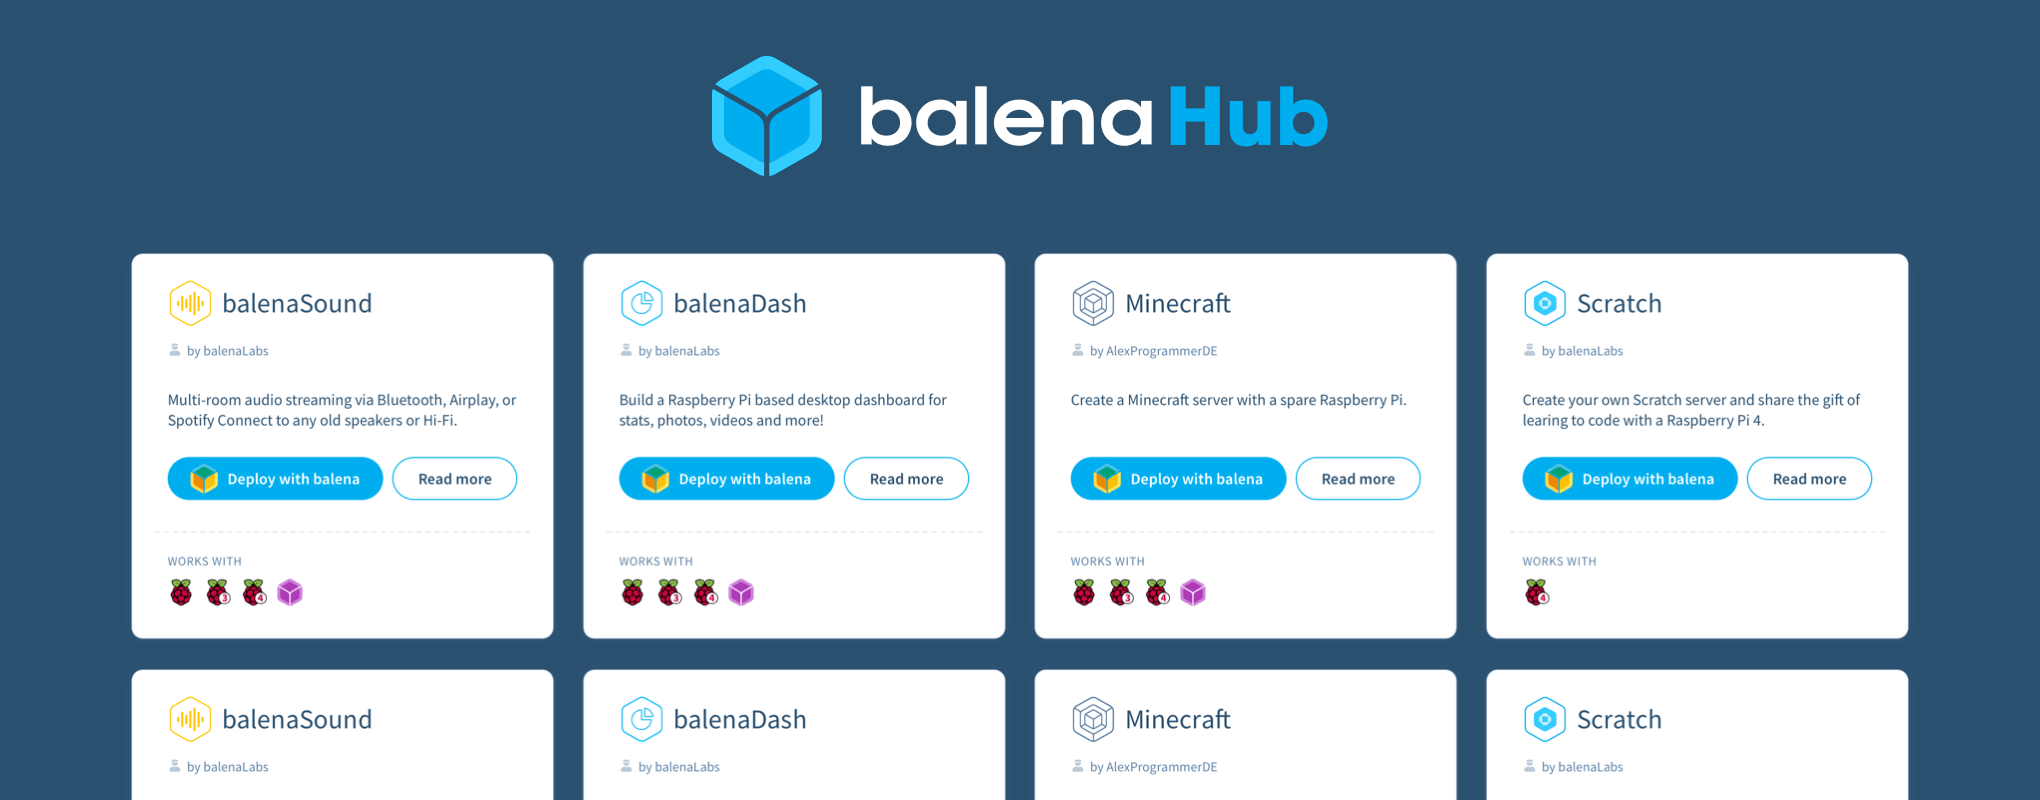 Introducing balenaHub: an easier way to find and publish apps and projects for edge devices